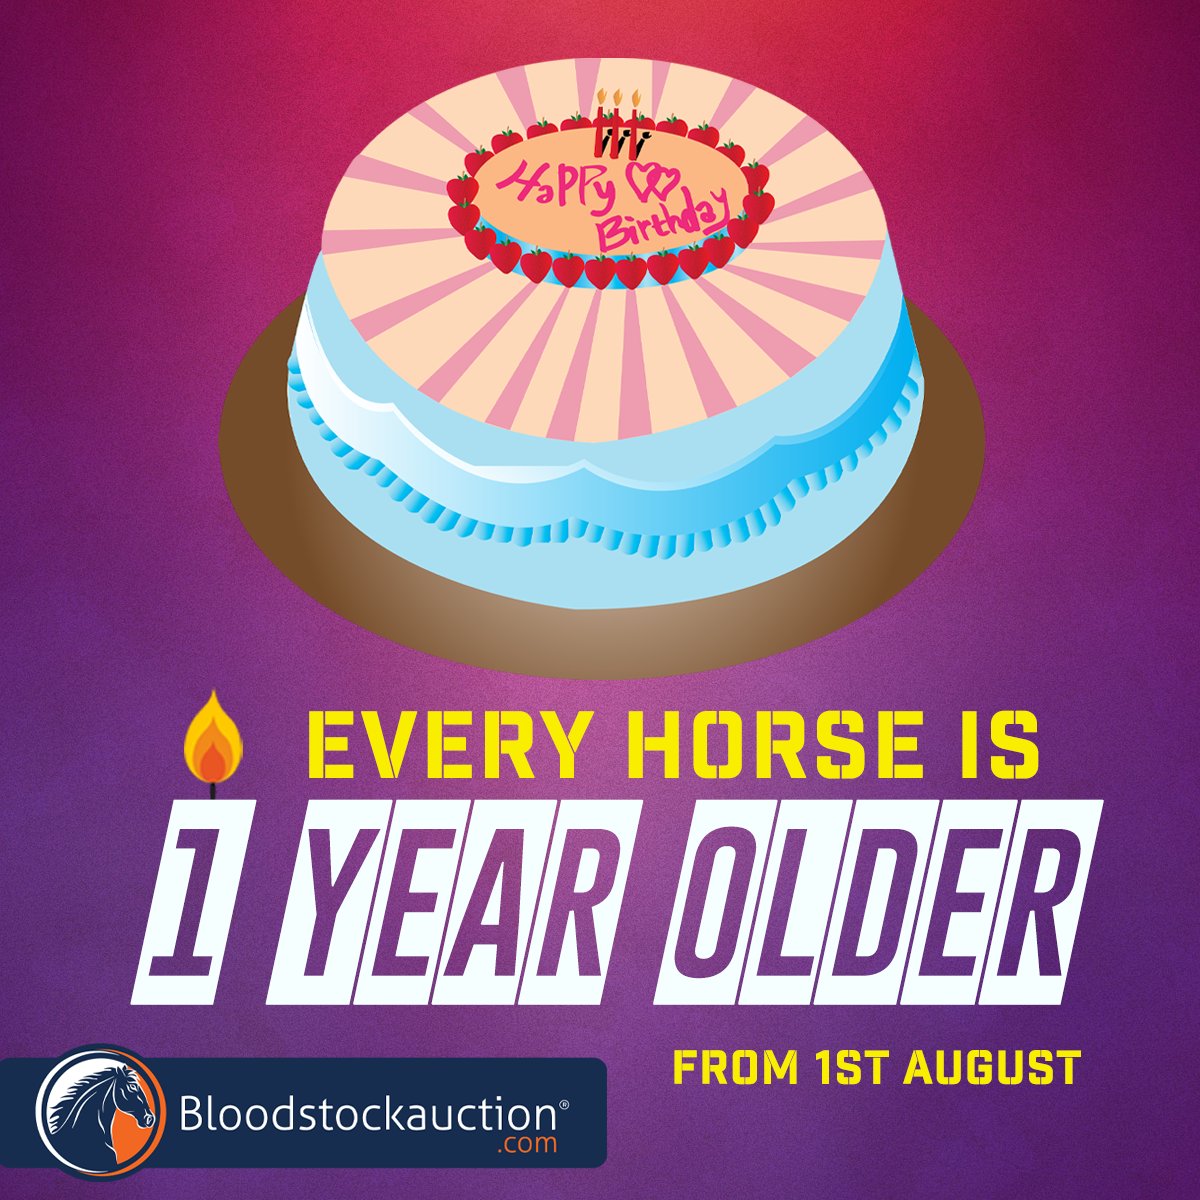 📷PSA: The 1st of August each year is the date that all horses in Australia turn one year older, no matter their actual foaling date. This means that at the end of our next auction, every horse listed in the auction catalogue will be 1 year older than when the auction started.